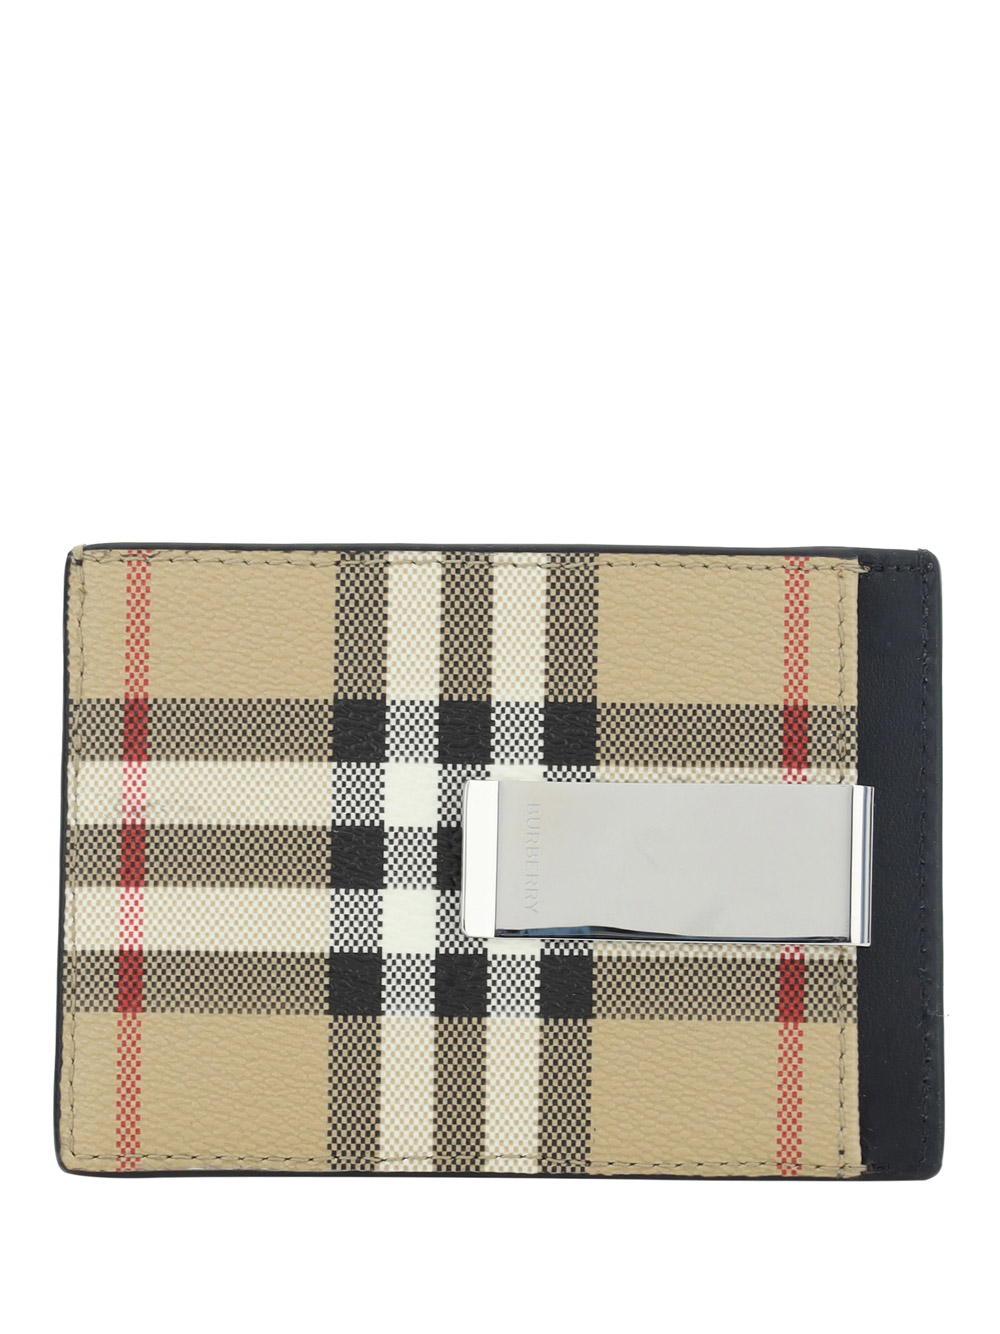 Burberry Chase Card Case in Metallic